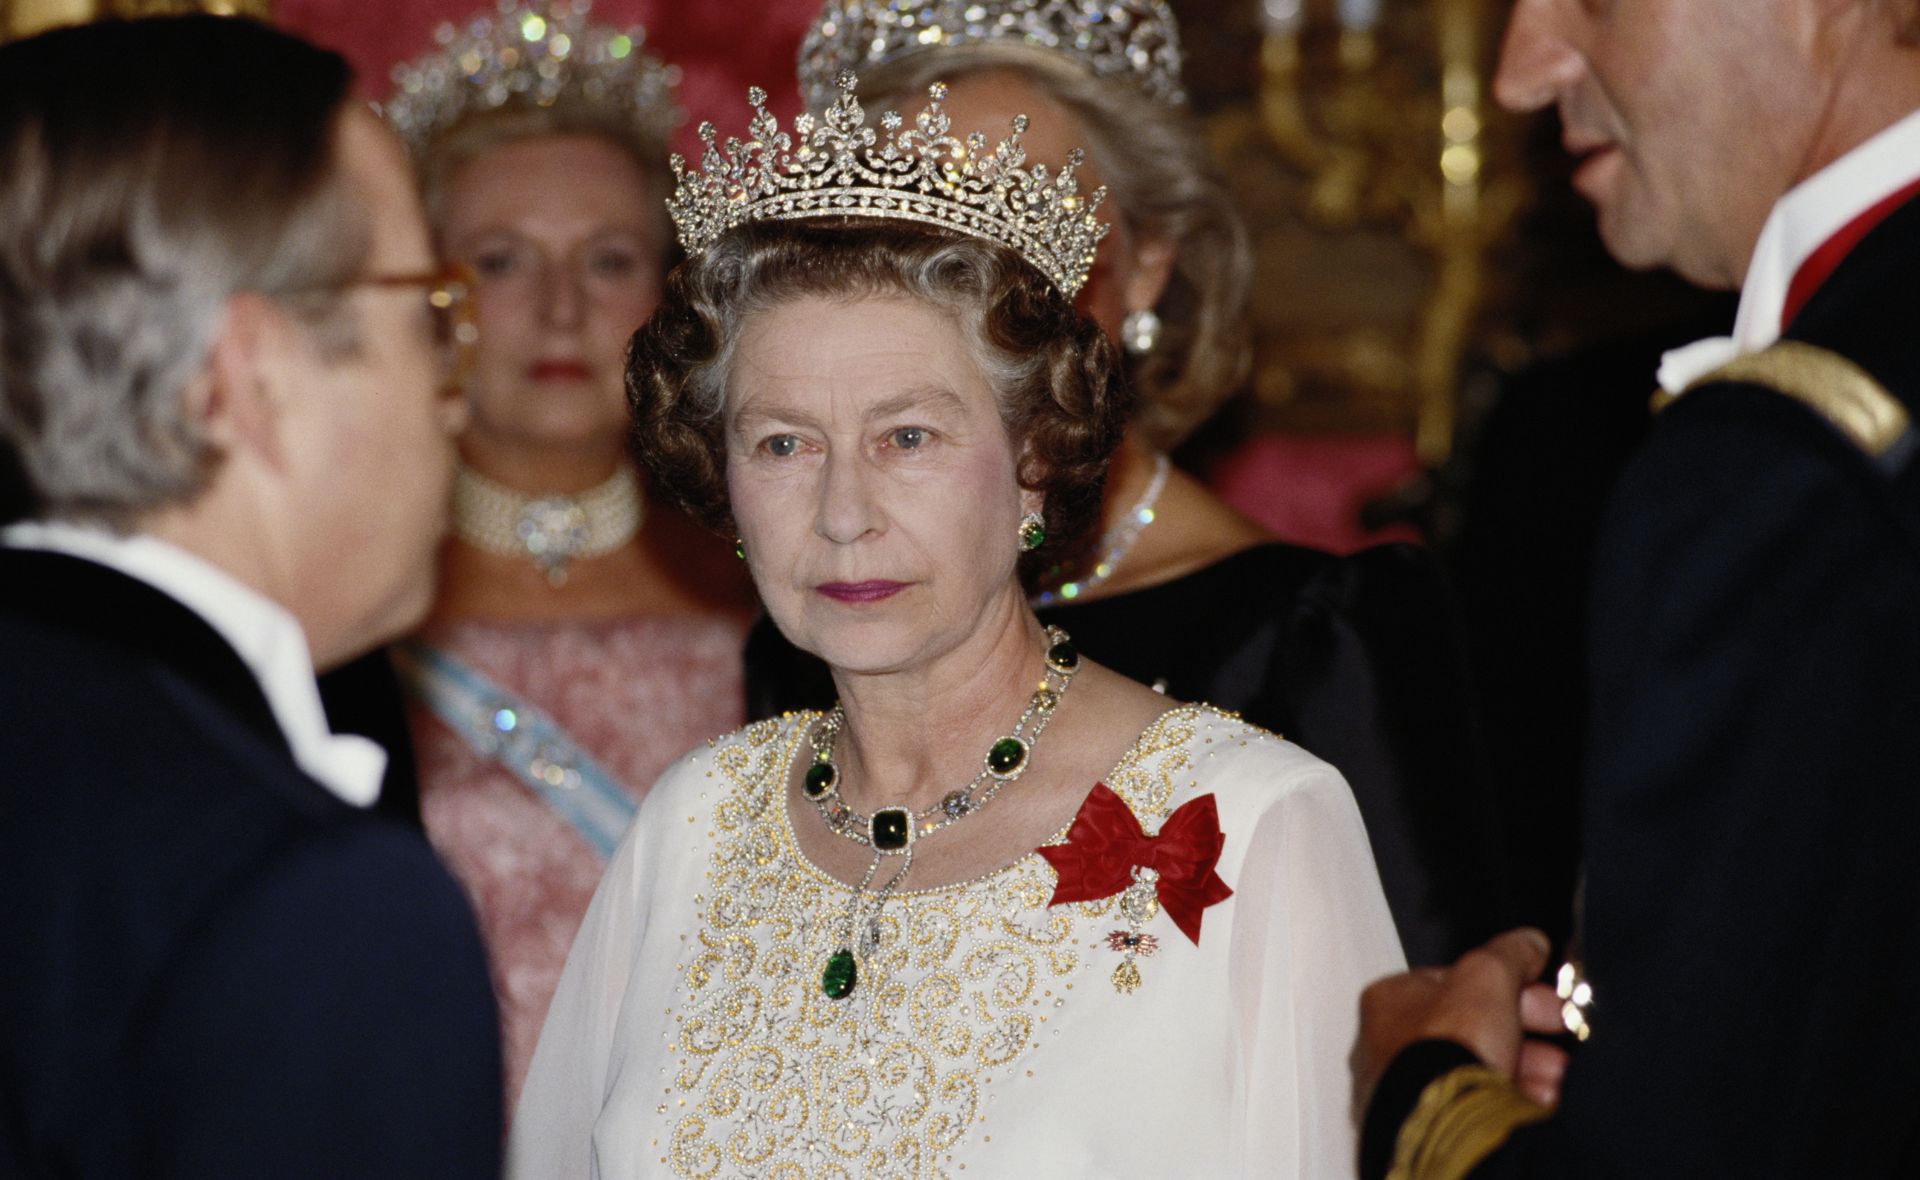 Who will inherit the Queen’s jewellery following her passing?